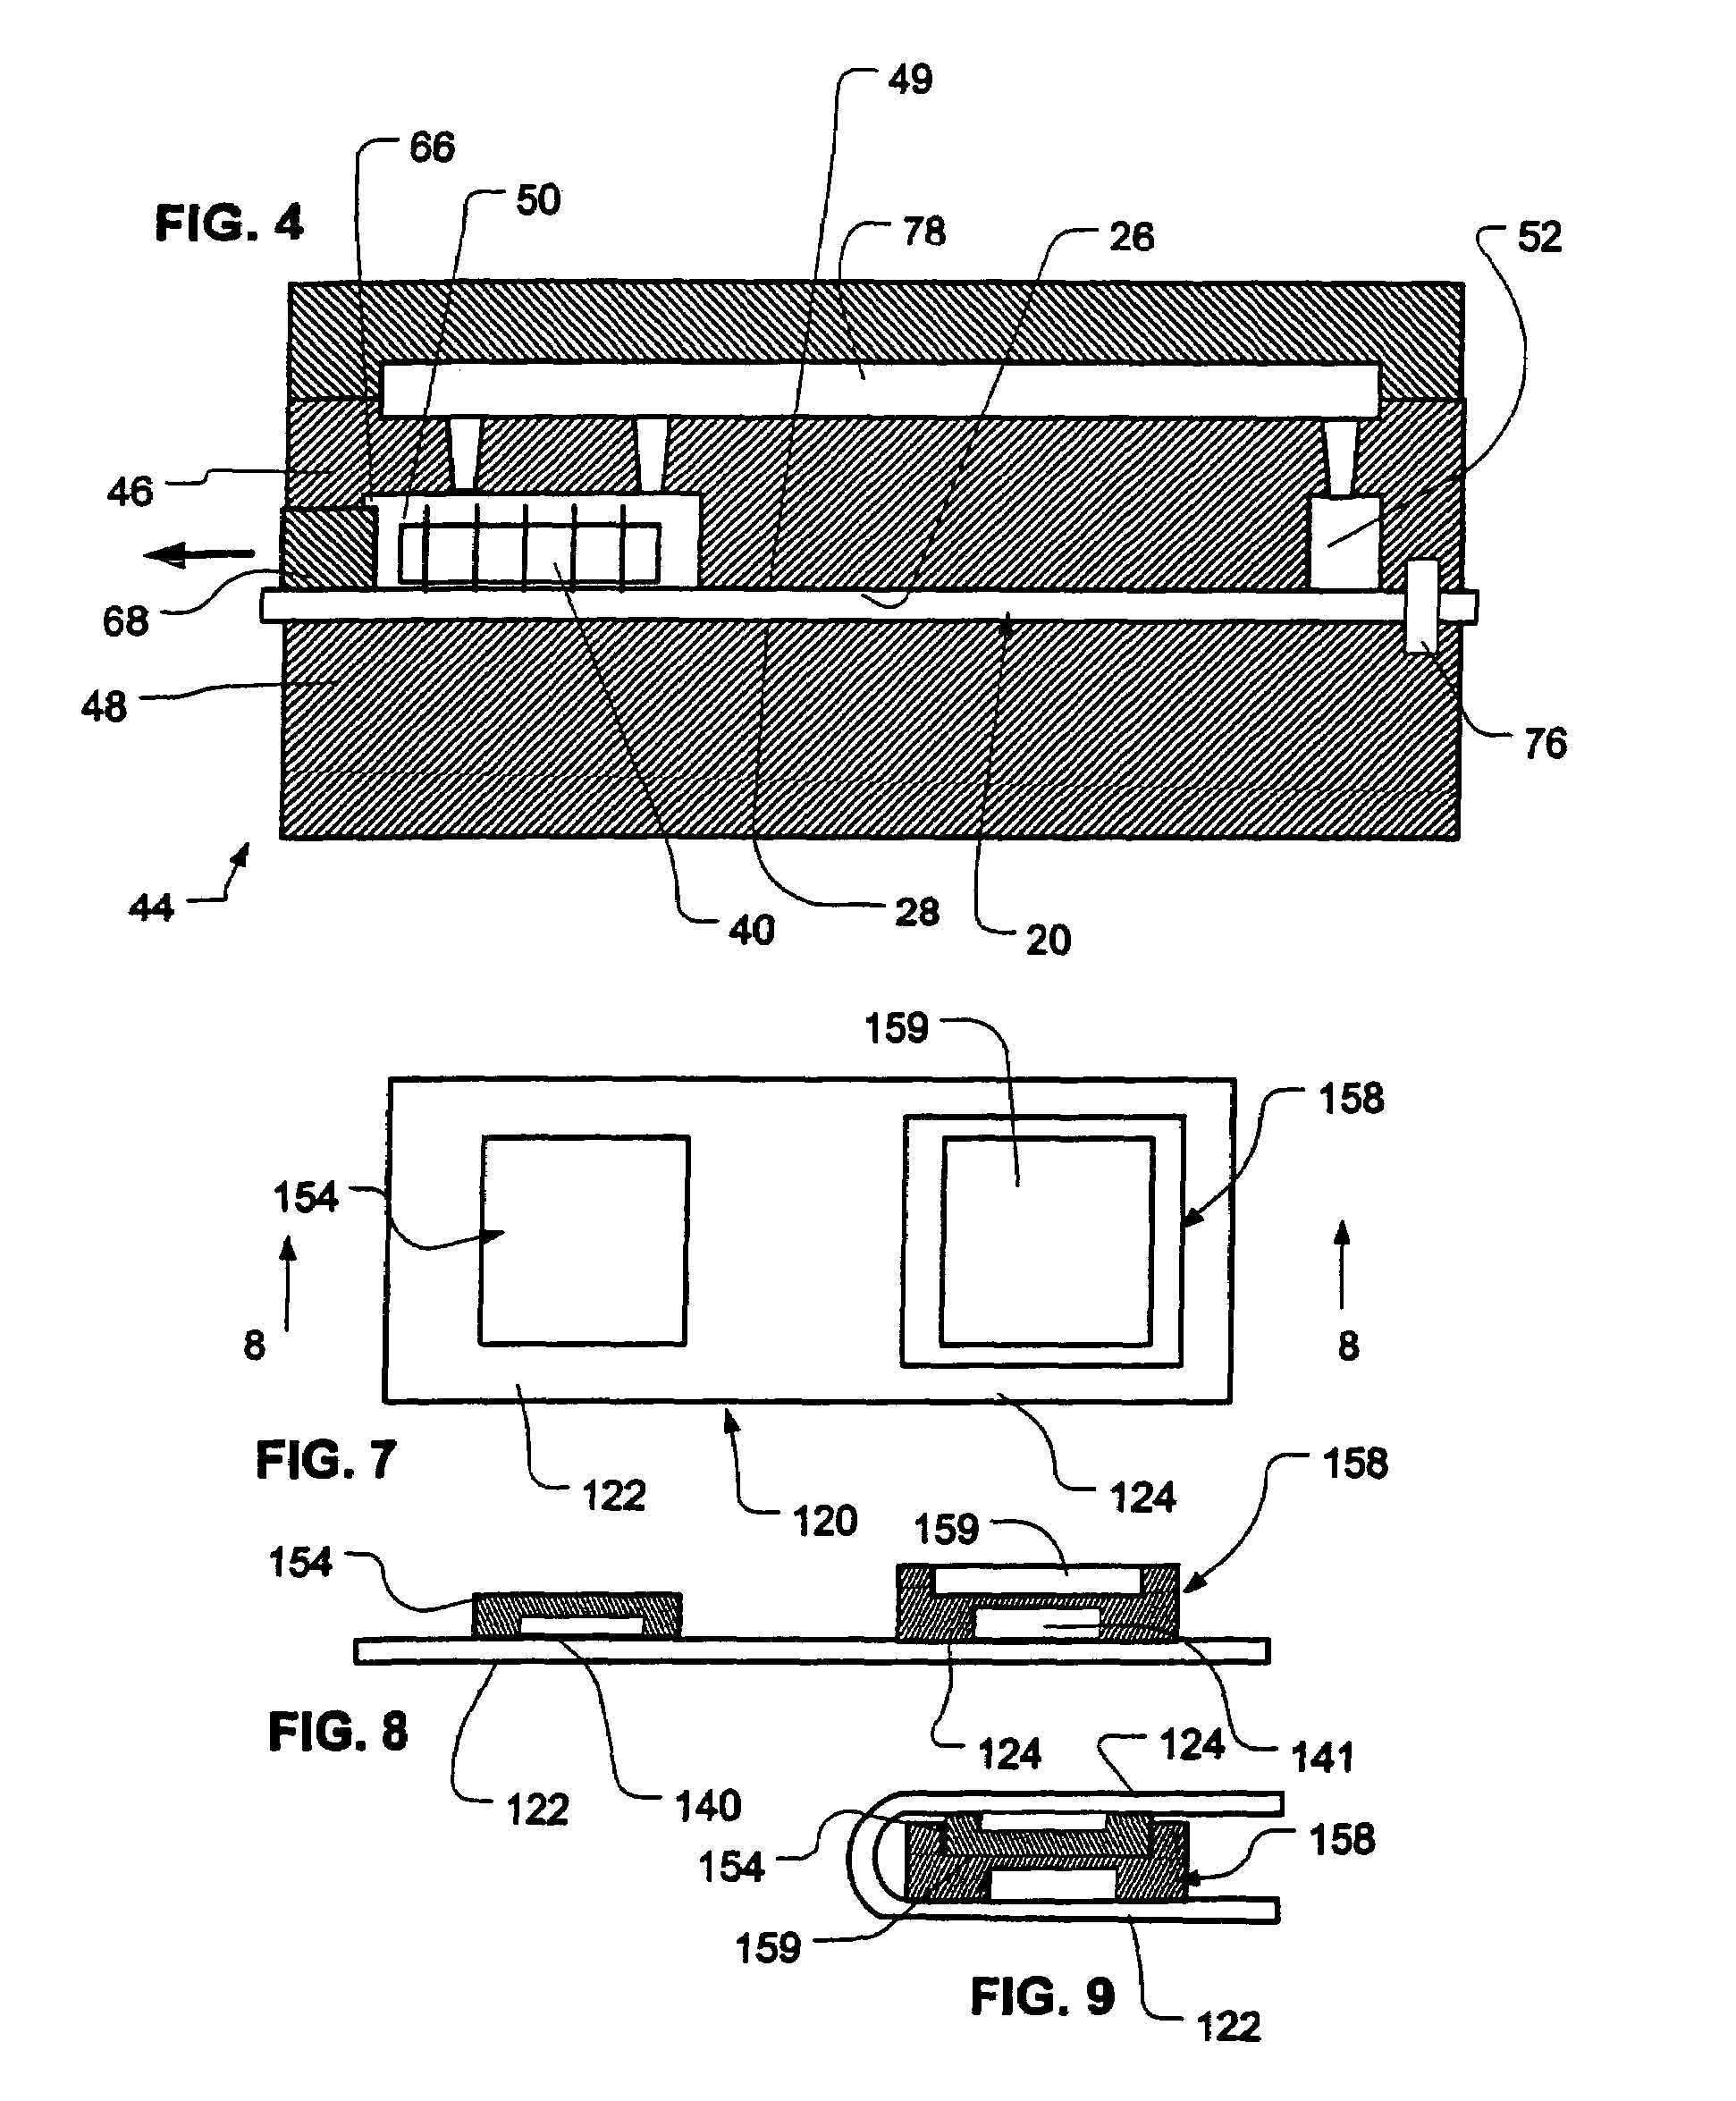 Microelectronic packages with self-aligning features